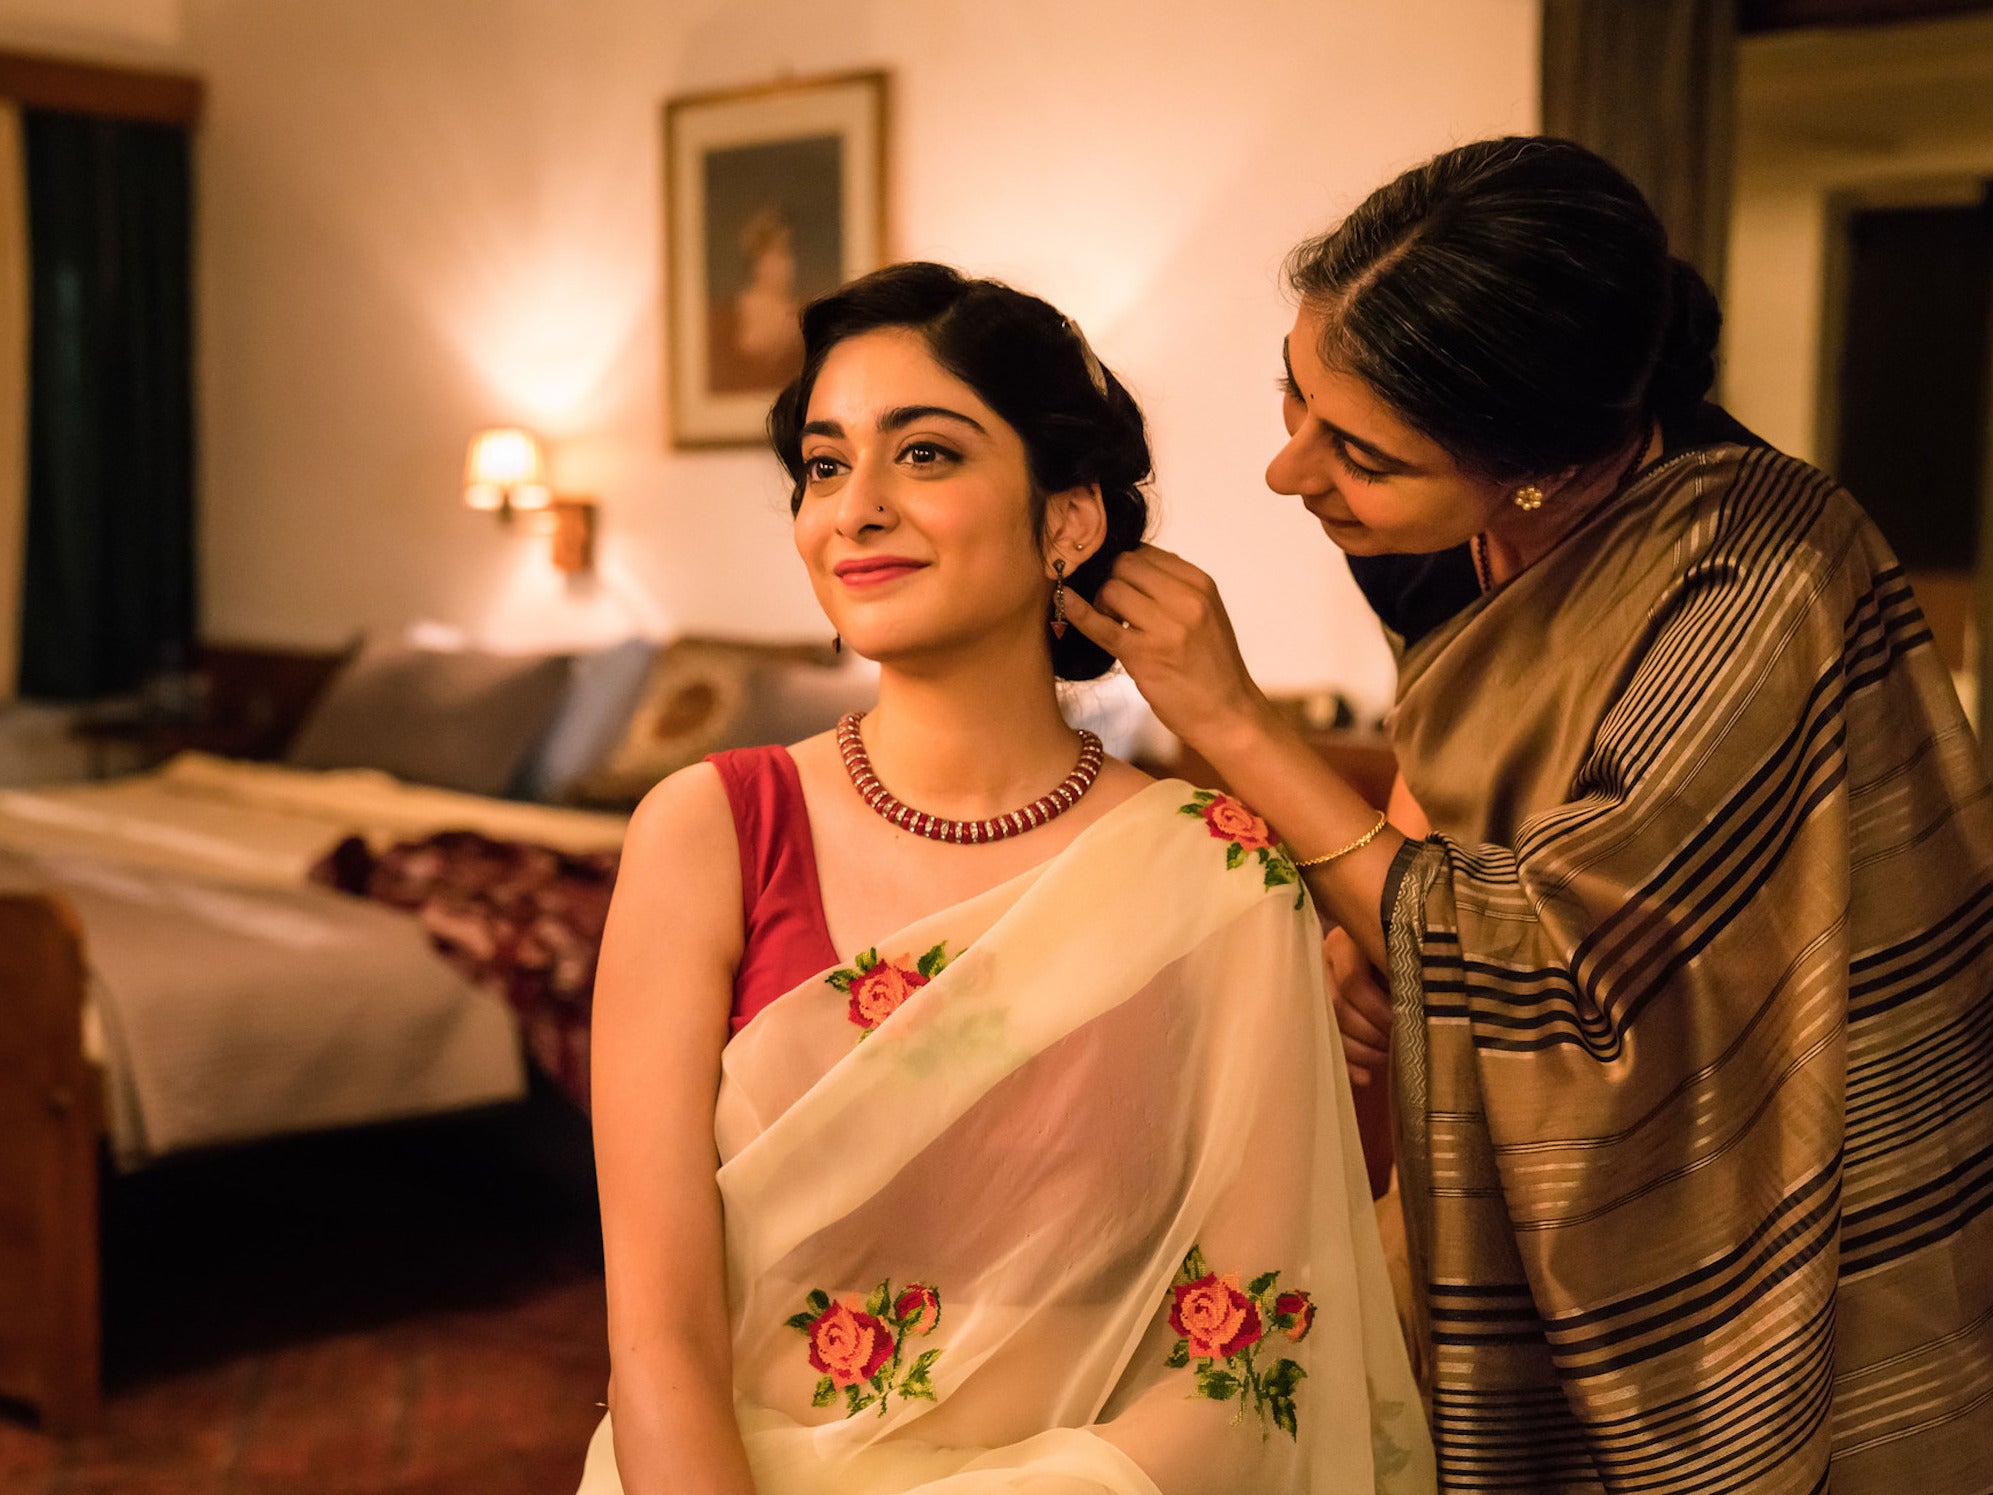 We have only seen glimpses of Indian culture Why A Suitable Boy is a milestone for Asian representation The Independent The Independent image pic